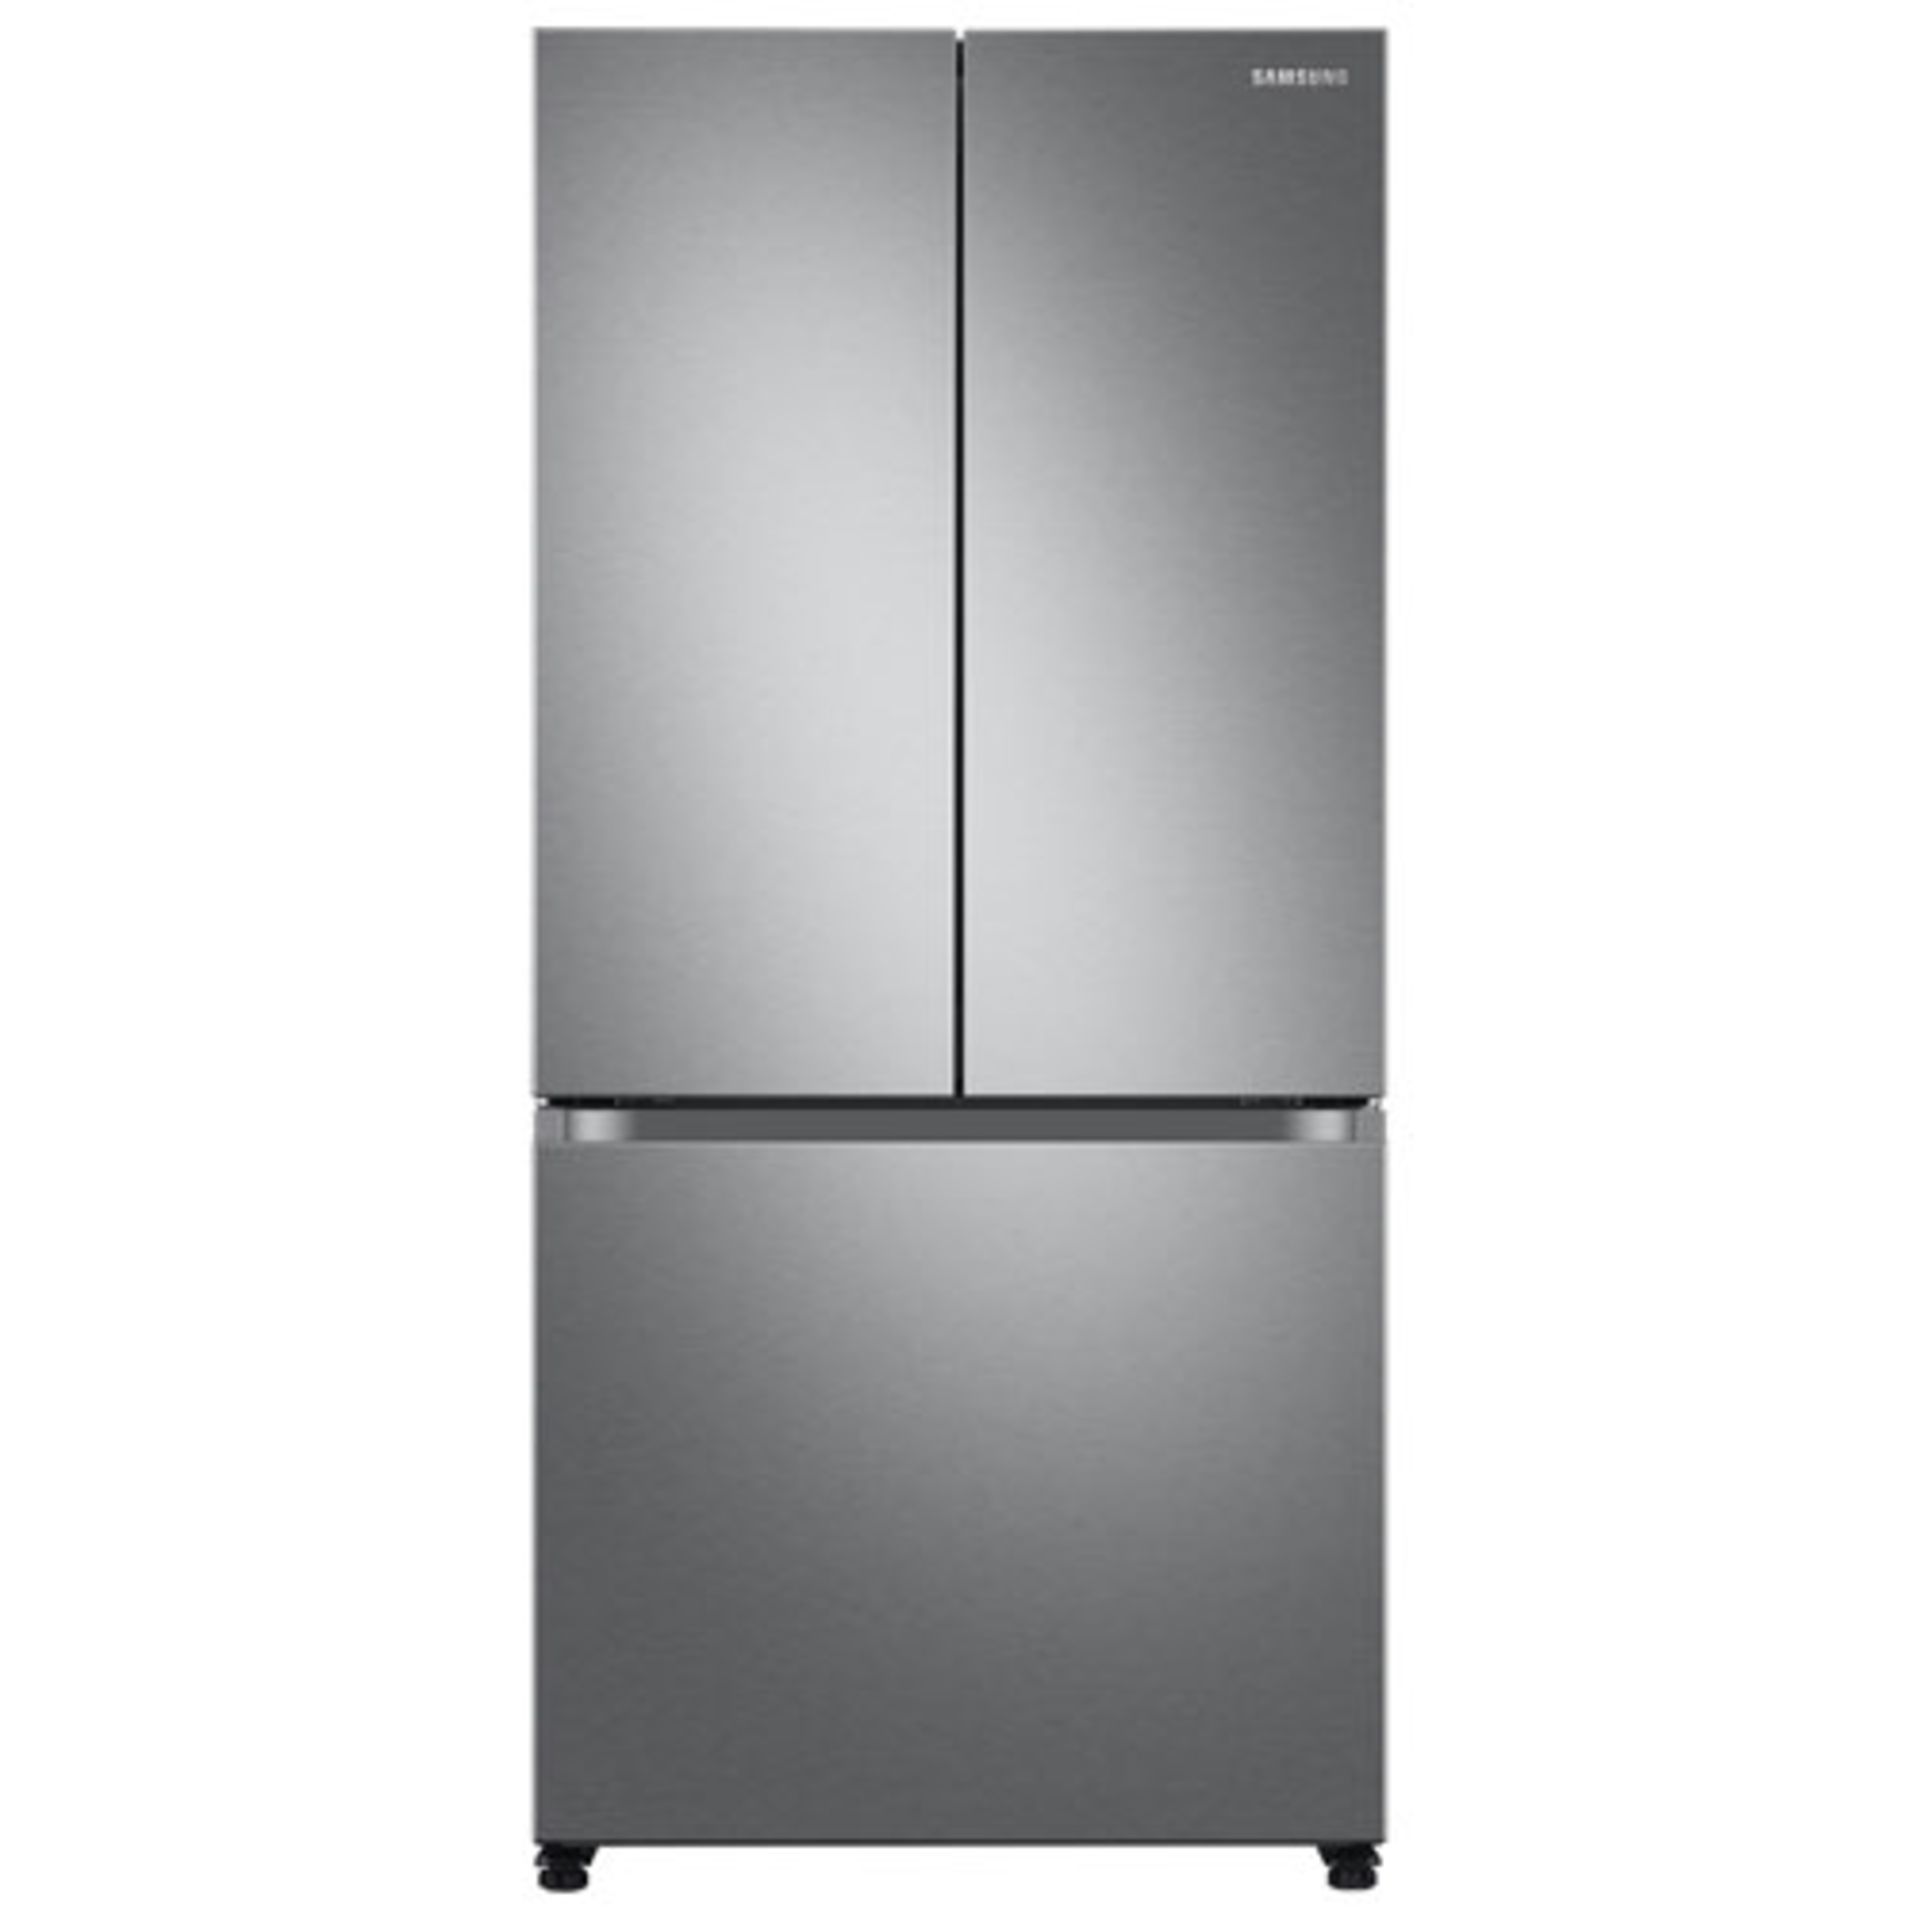 Samsung 33" 17.5 Cu. Ft. Counter-Depth French Door Refrigerator with Ice Dispenser - Stainless